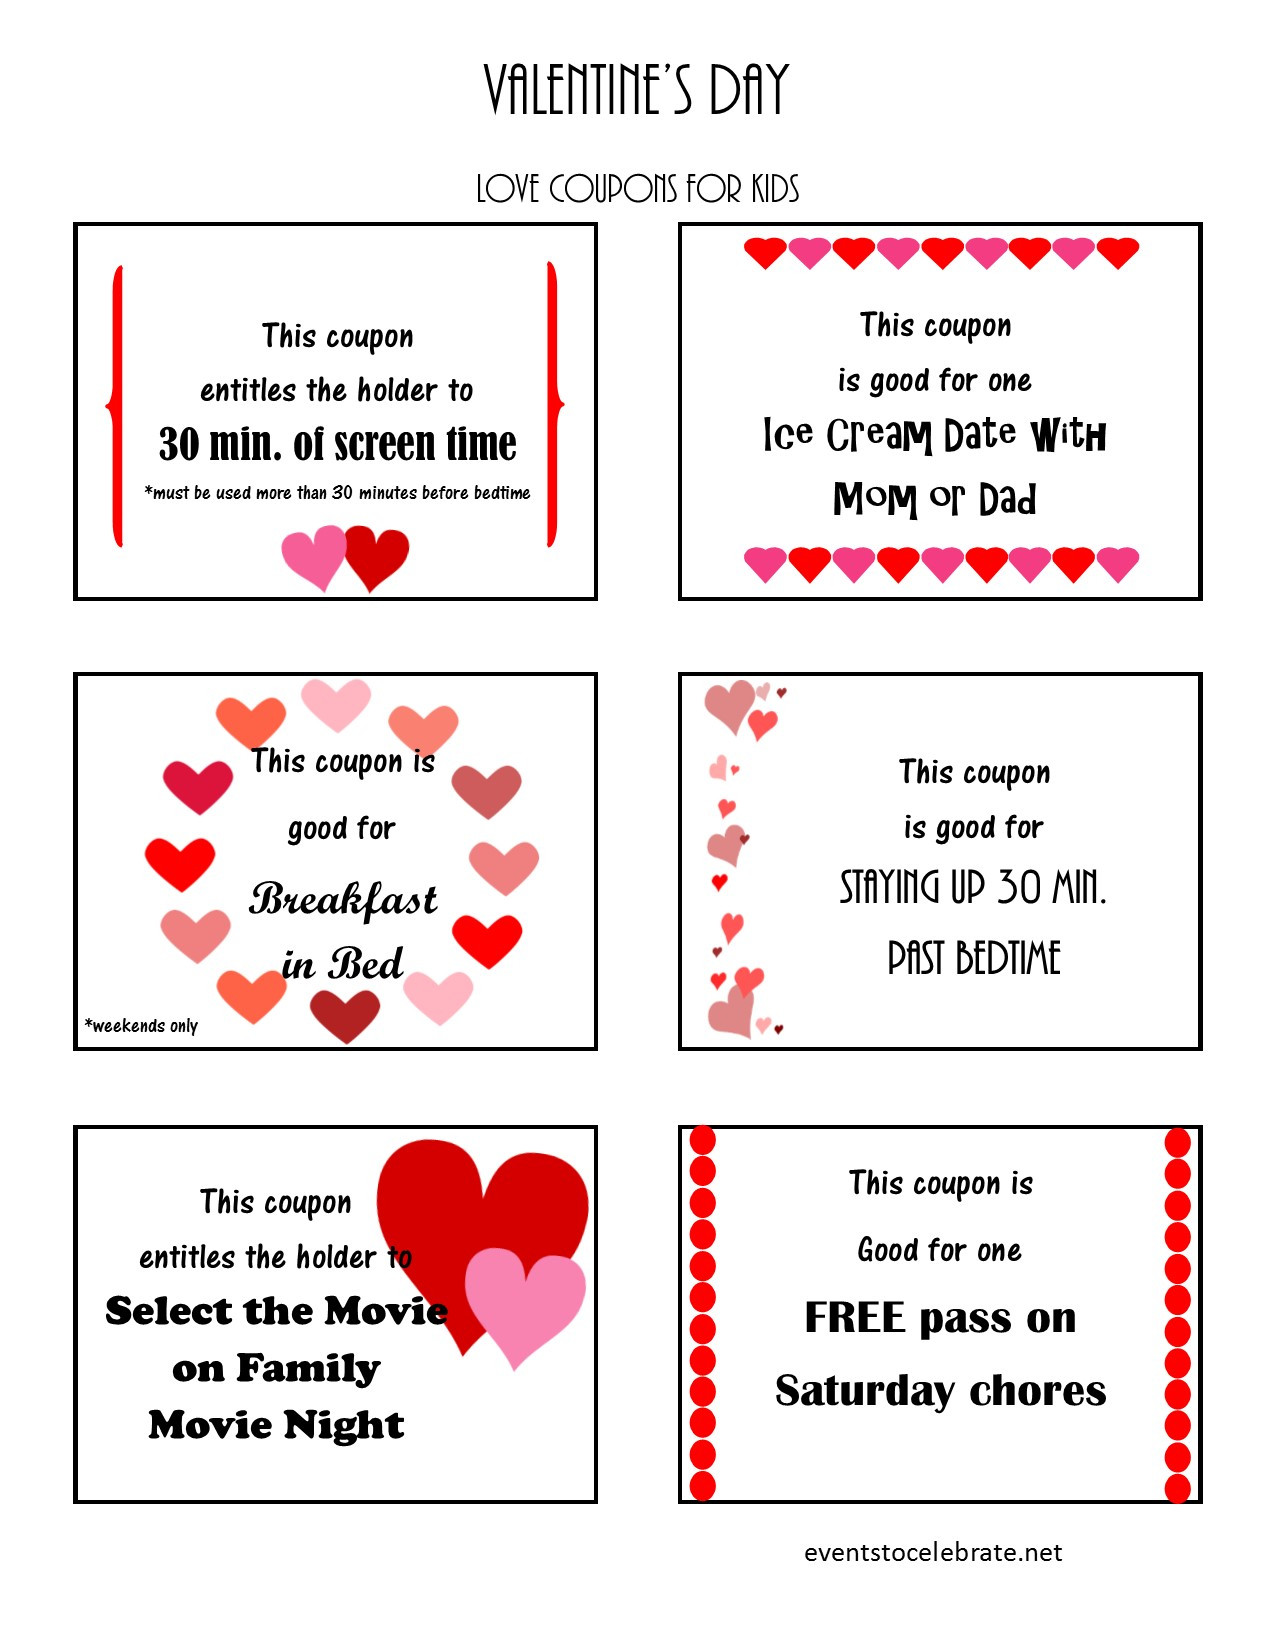 Valentines Day Coupon Ideas
 Valentine Coupon Ideas